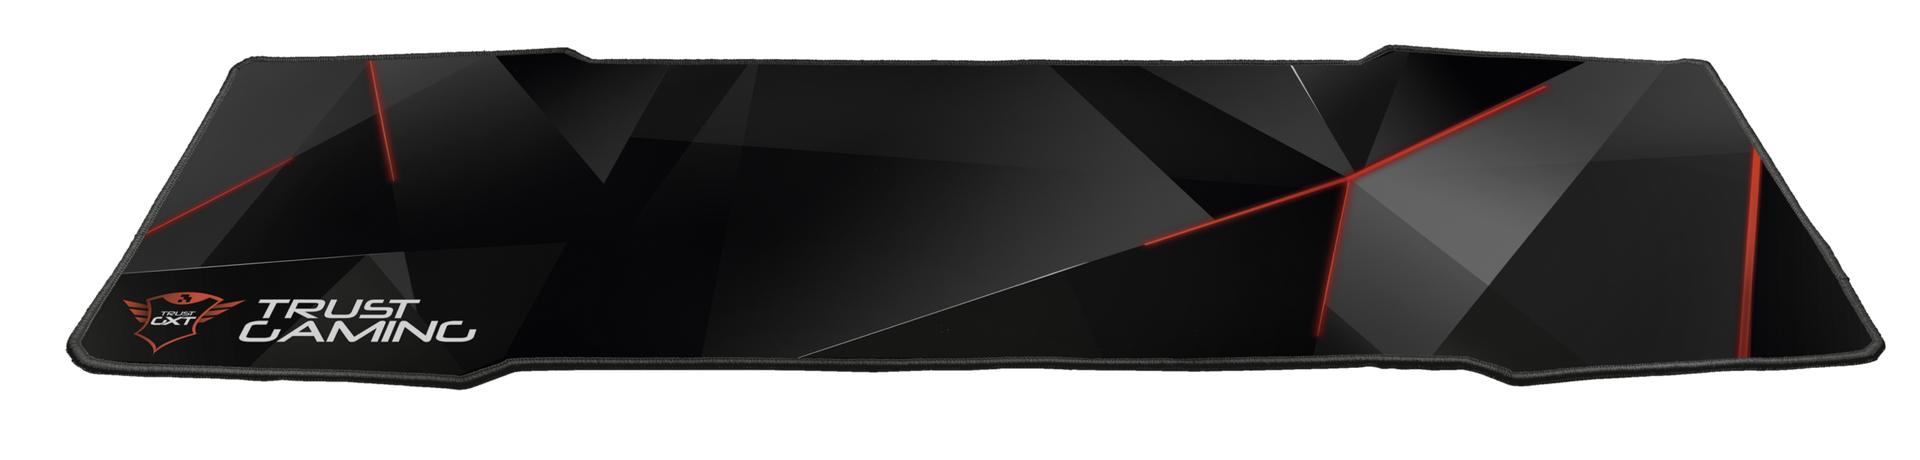 GXT 209 Gaming Mouse Pad XXXL-Visual